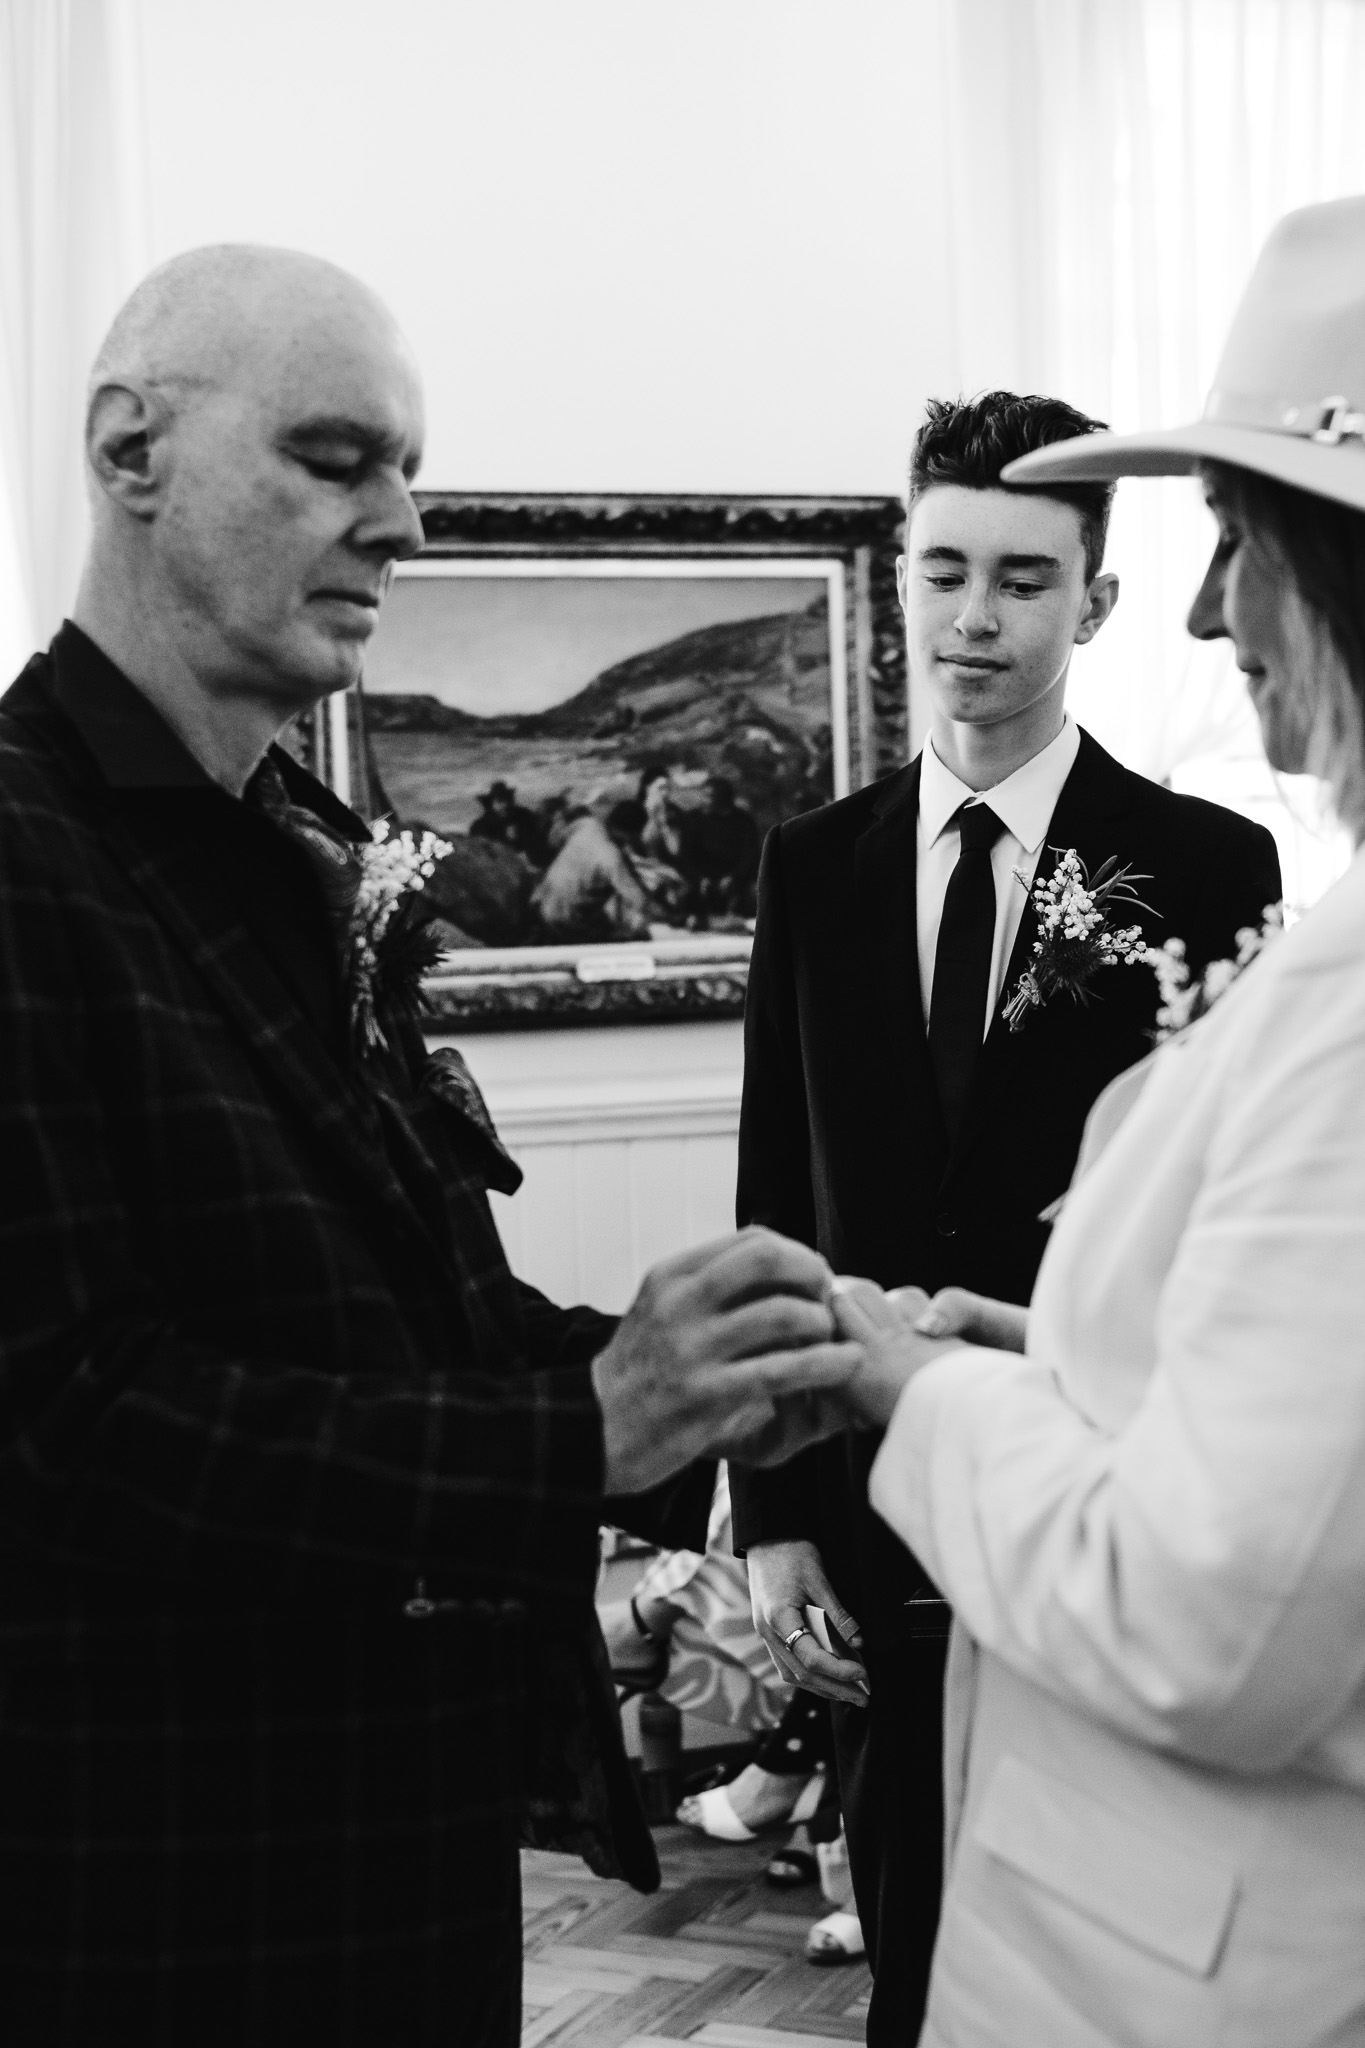 The bride and groom's son watches over them as they exchange wedding rings during their wedding ceremony.